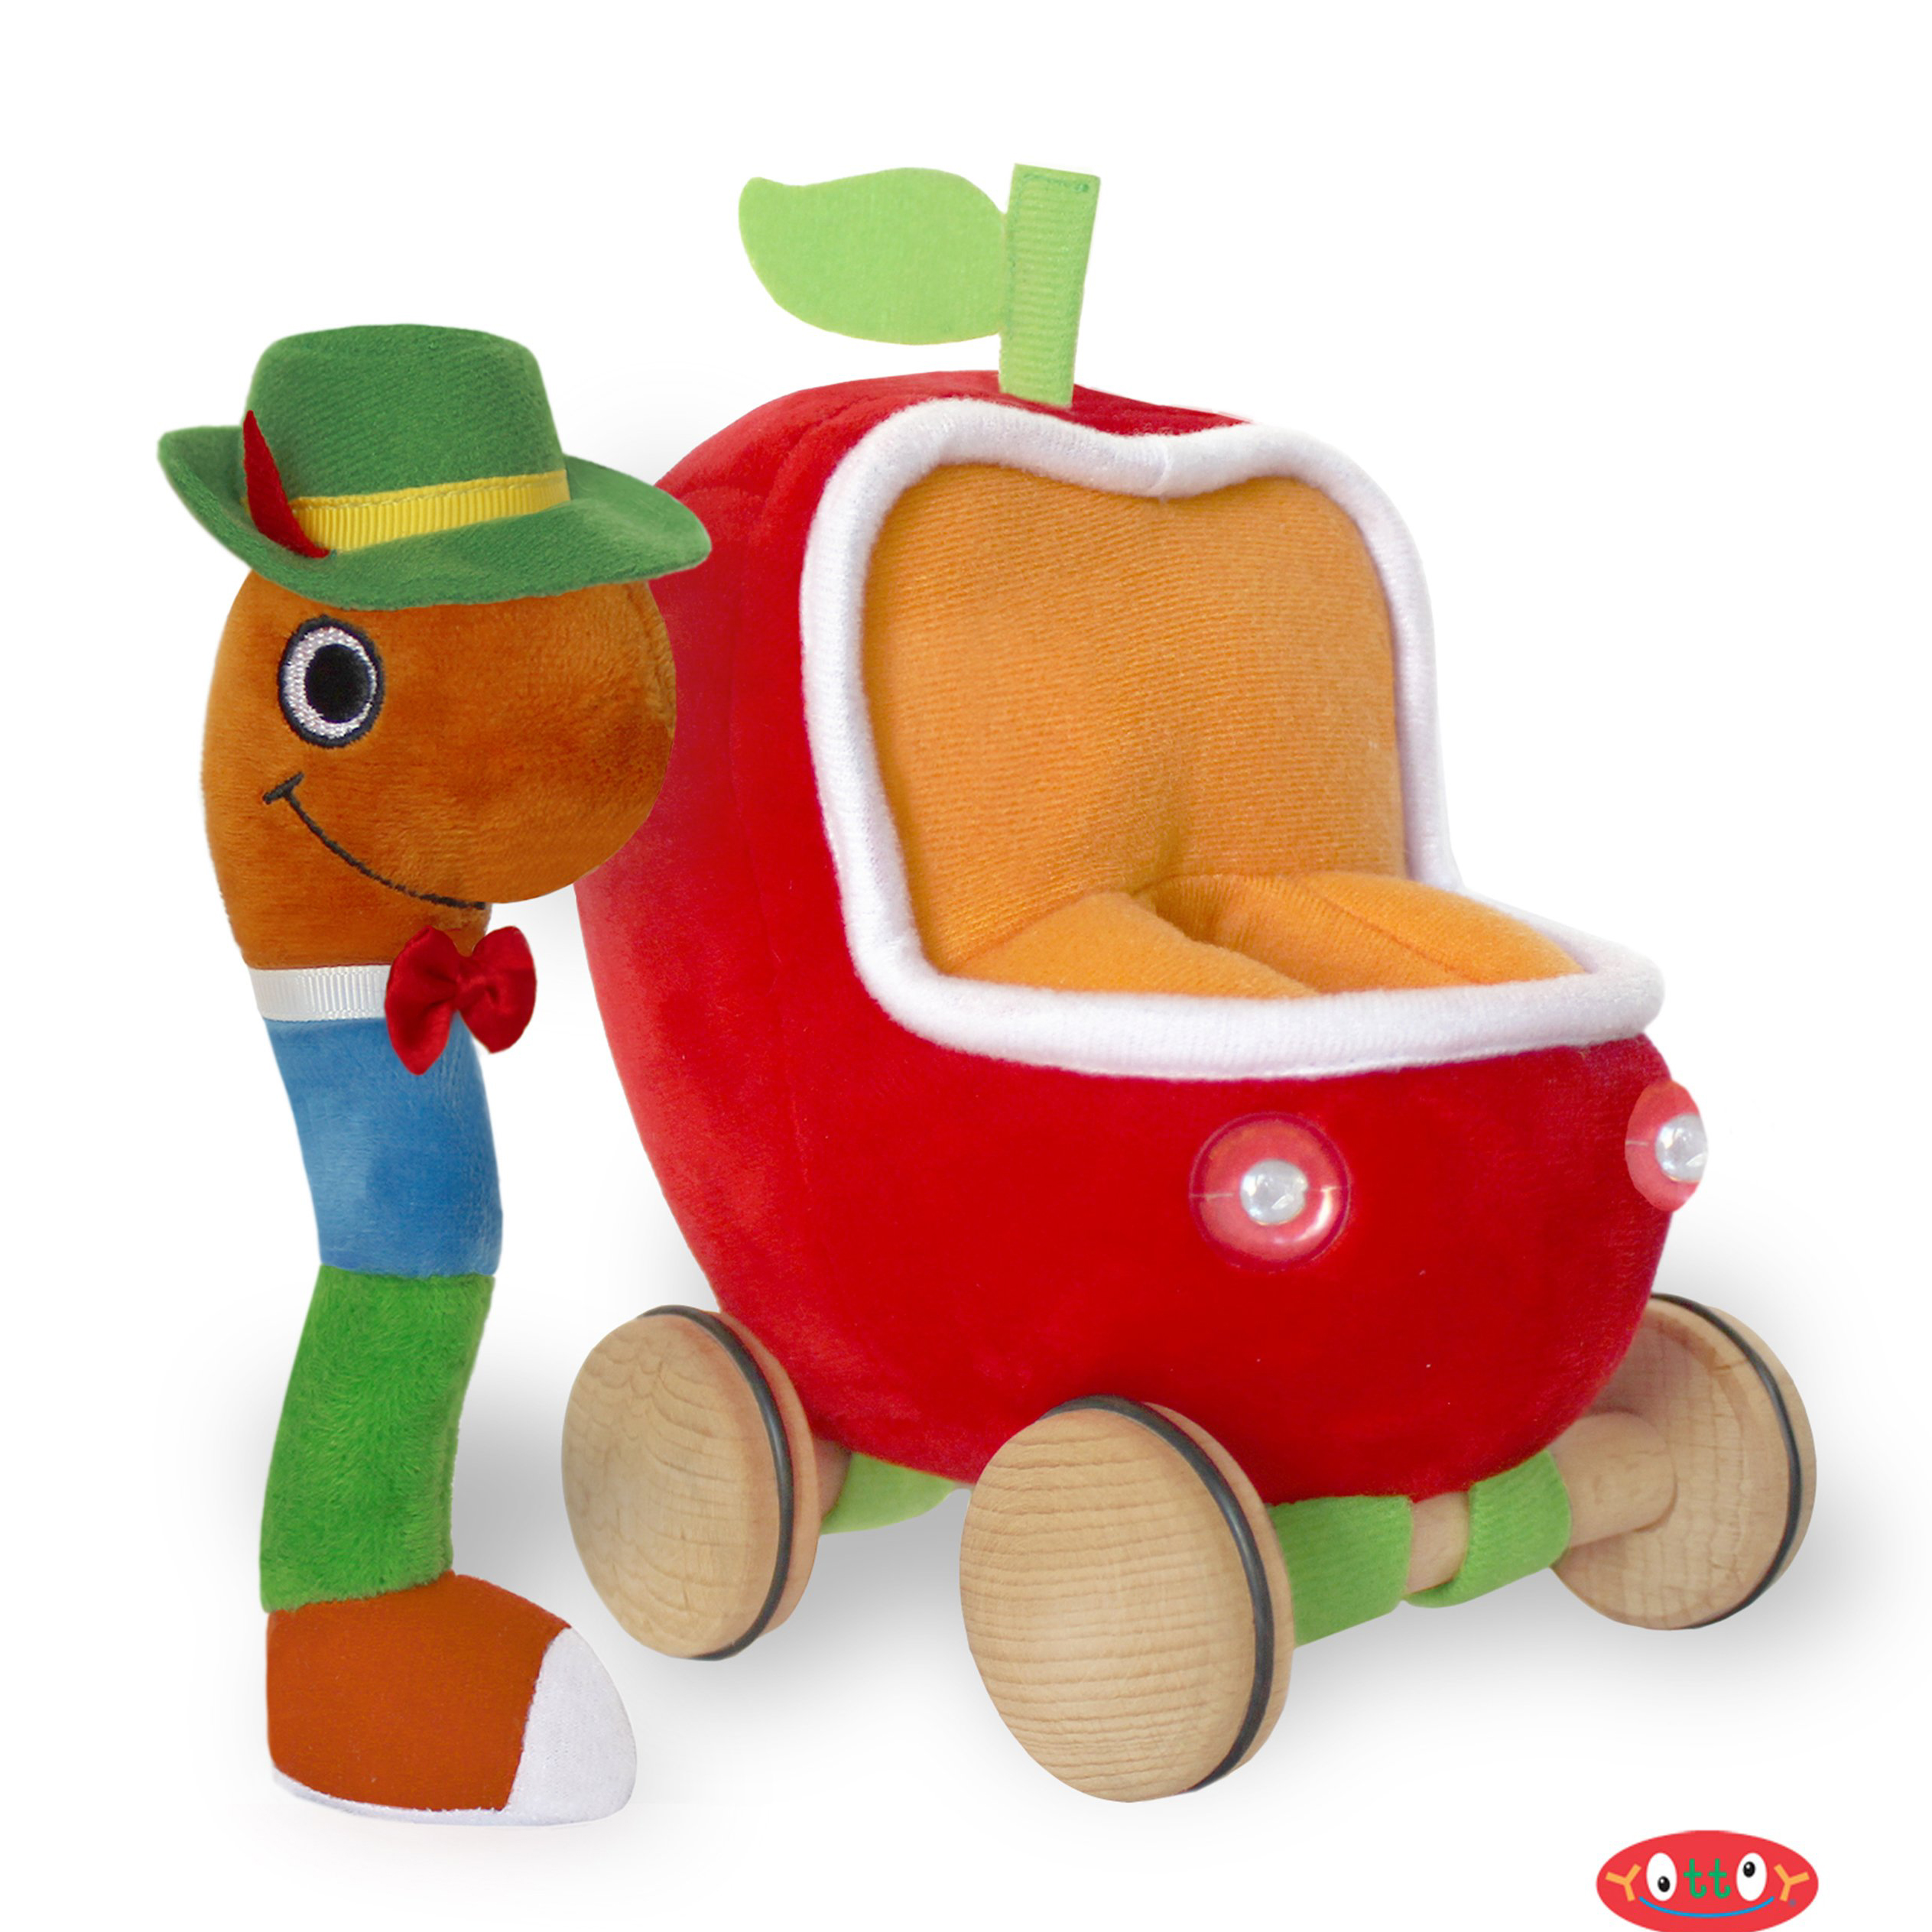 Lowly Worm soft toy and Apple car 2